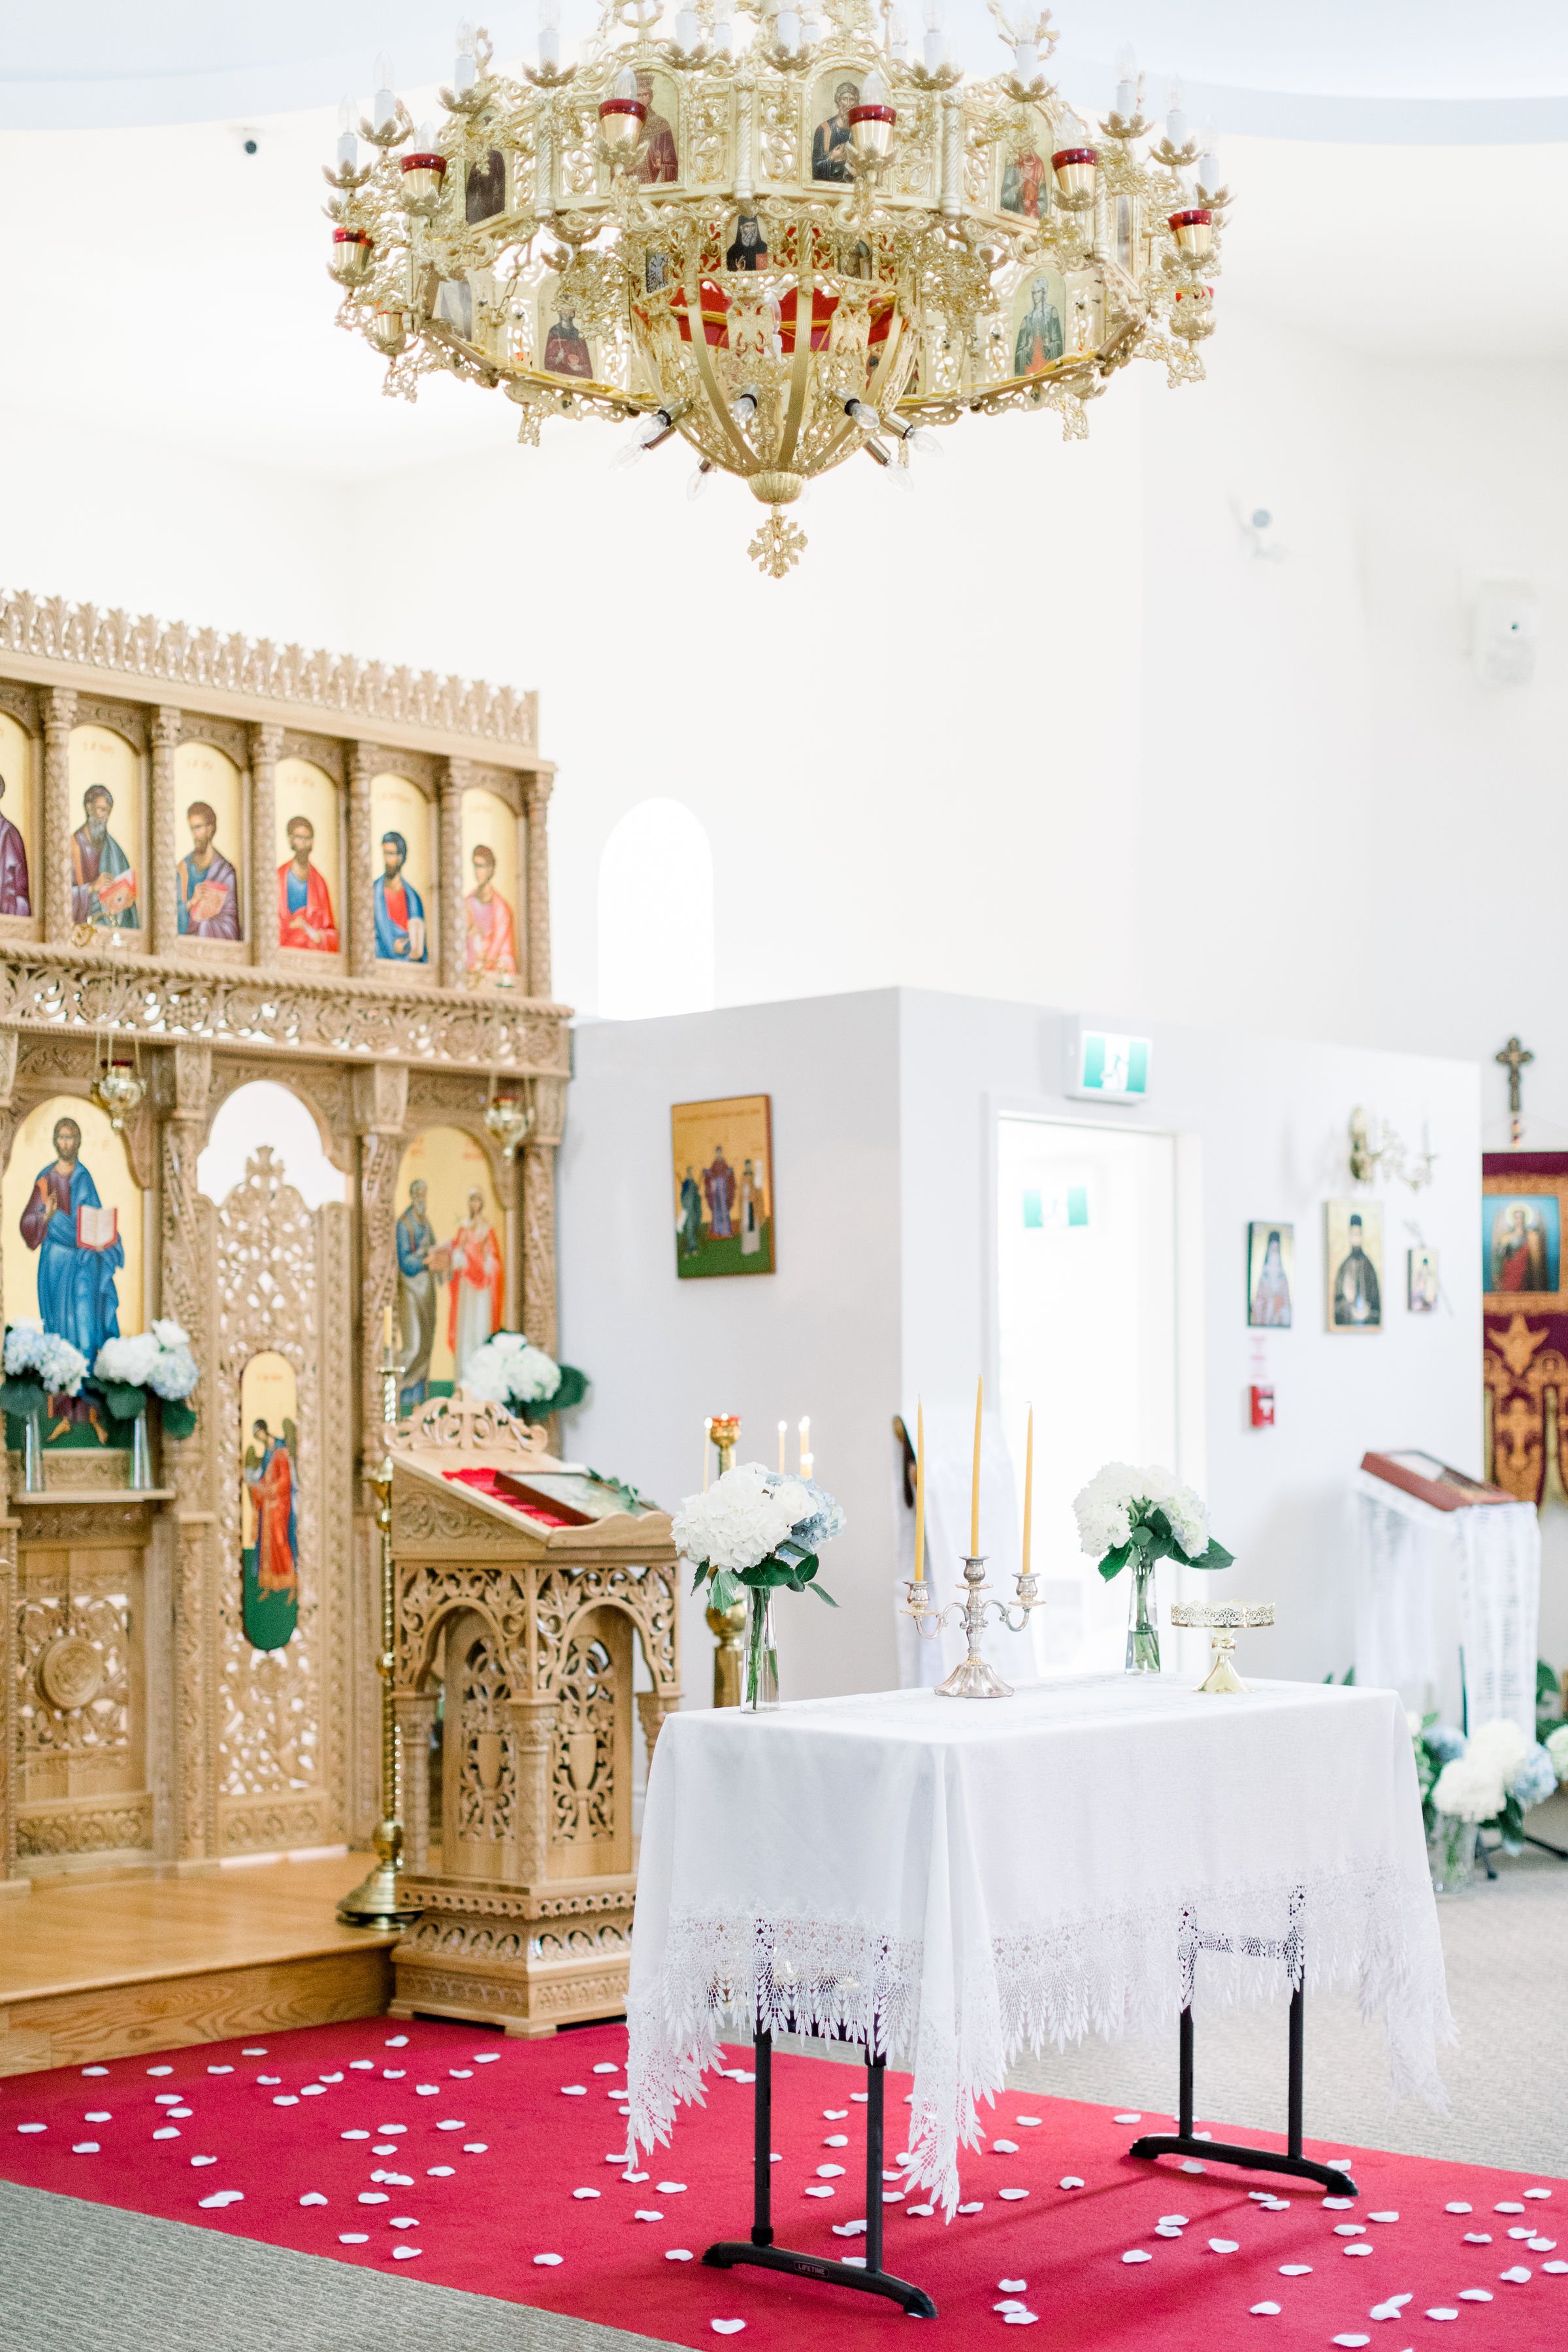  Beautiful Catholic venue for weddings in Almonte, Ontario by Chelsea Mason Photography a wedding photographer. Catholic chapel #Chelseamasonphotography #Chelseamasonweddings #Onatarioweddings #EvermoreweddingsAlmonte #Ontarioweddingphotographers 